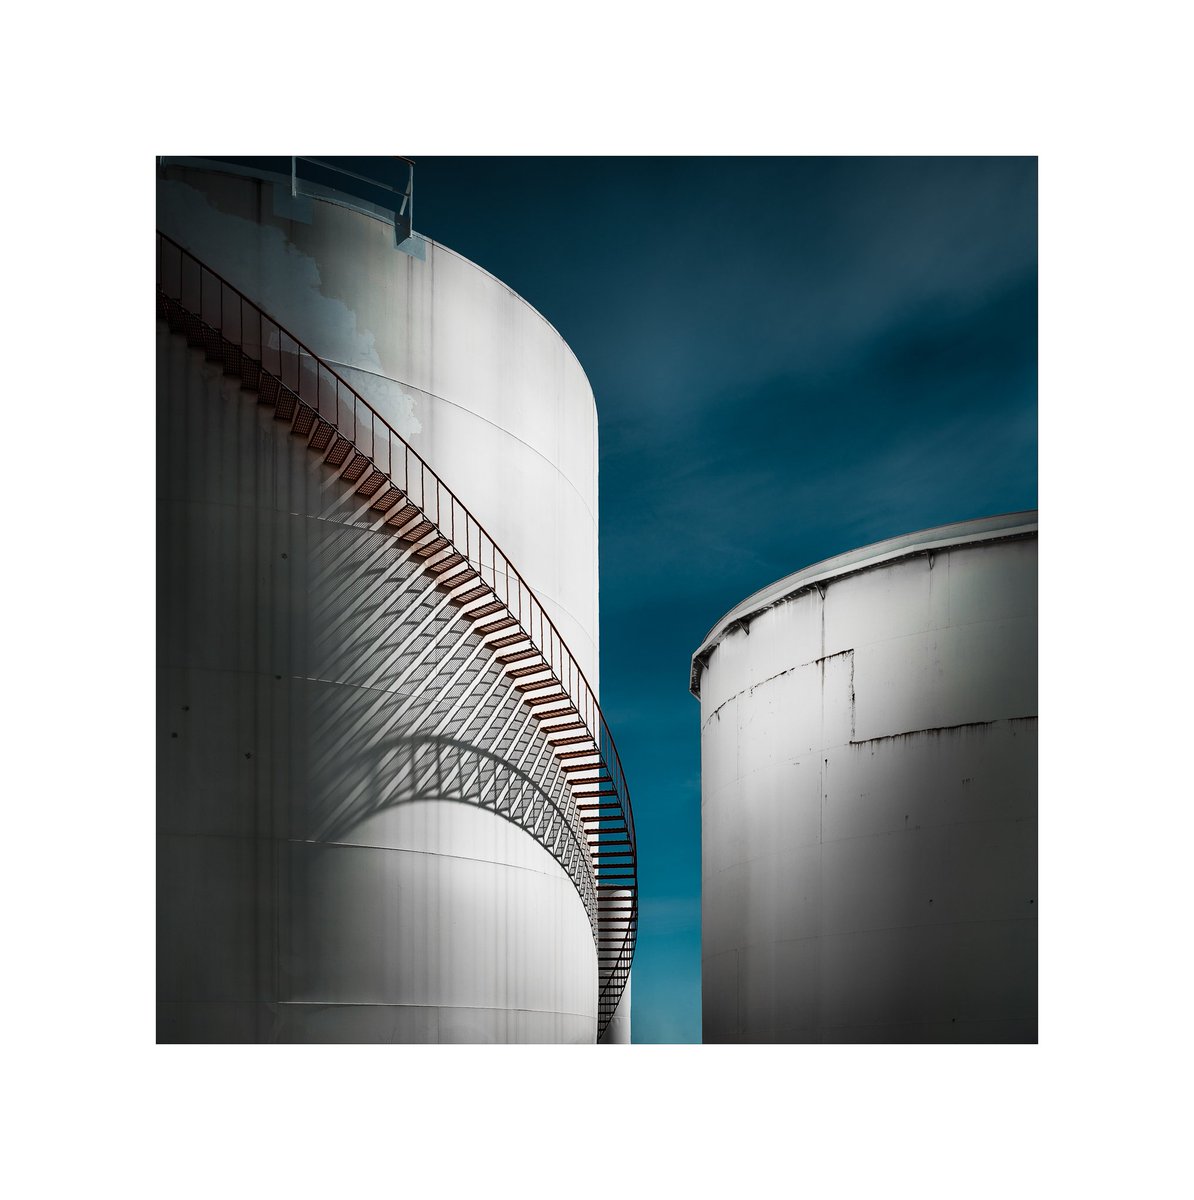 The Tank Farm
This was not an easy shot as the fence was tall and I had to raise my hands to shoot through the fence.  The shadows of the stairs caught my attention from afar and I just had to stop for me to steal a couple of shots.

#hasselbladX1D #hasselblad #createtoinspire